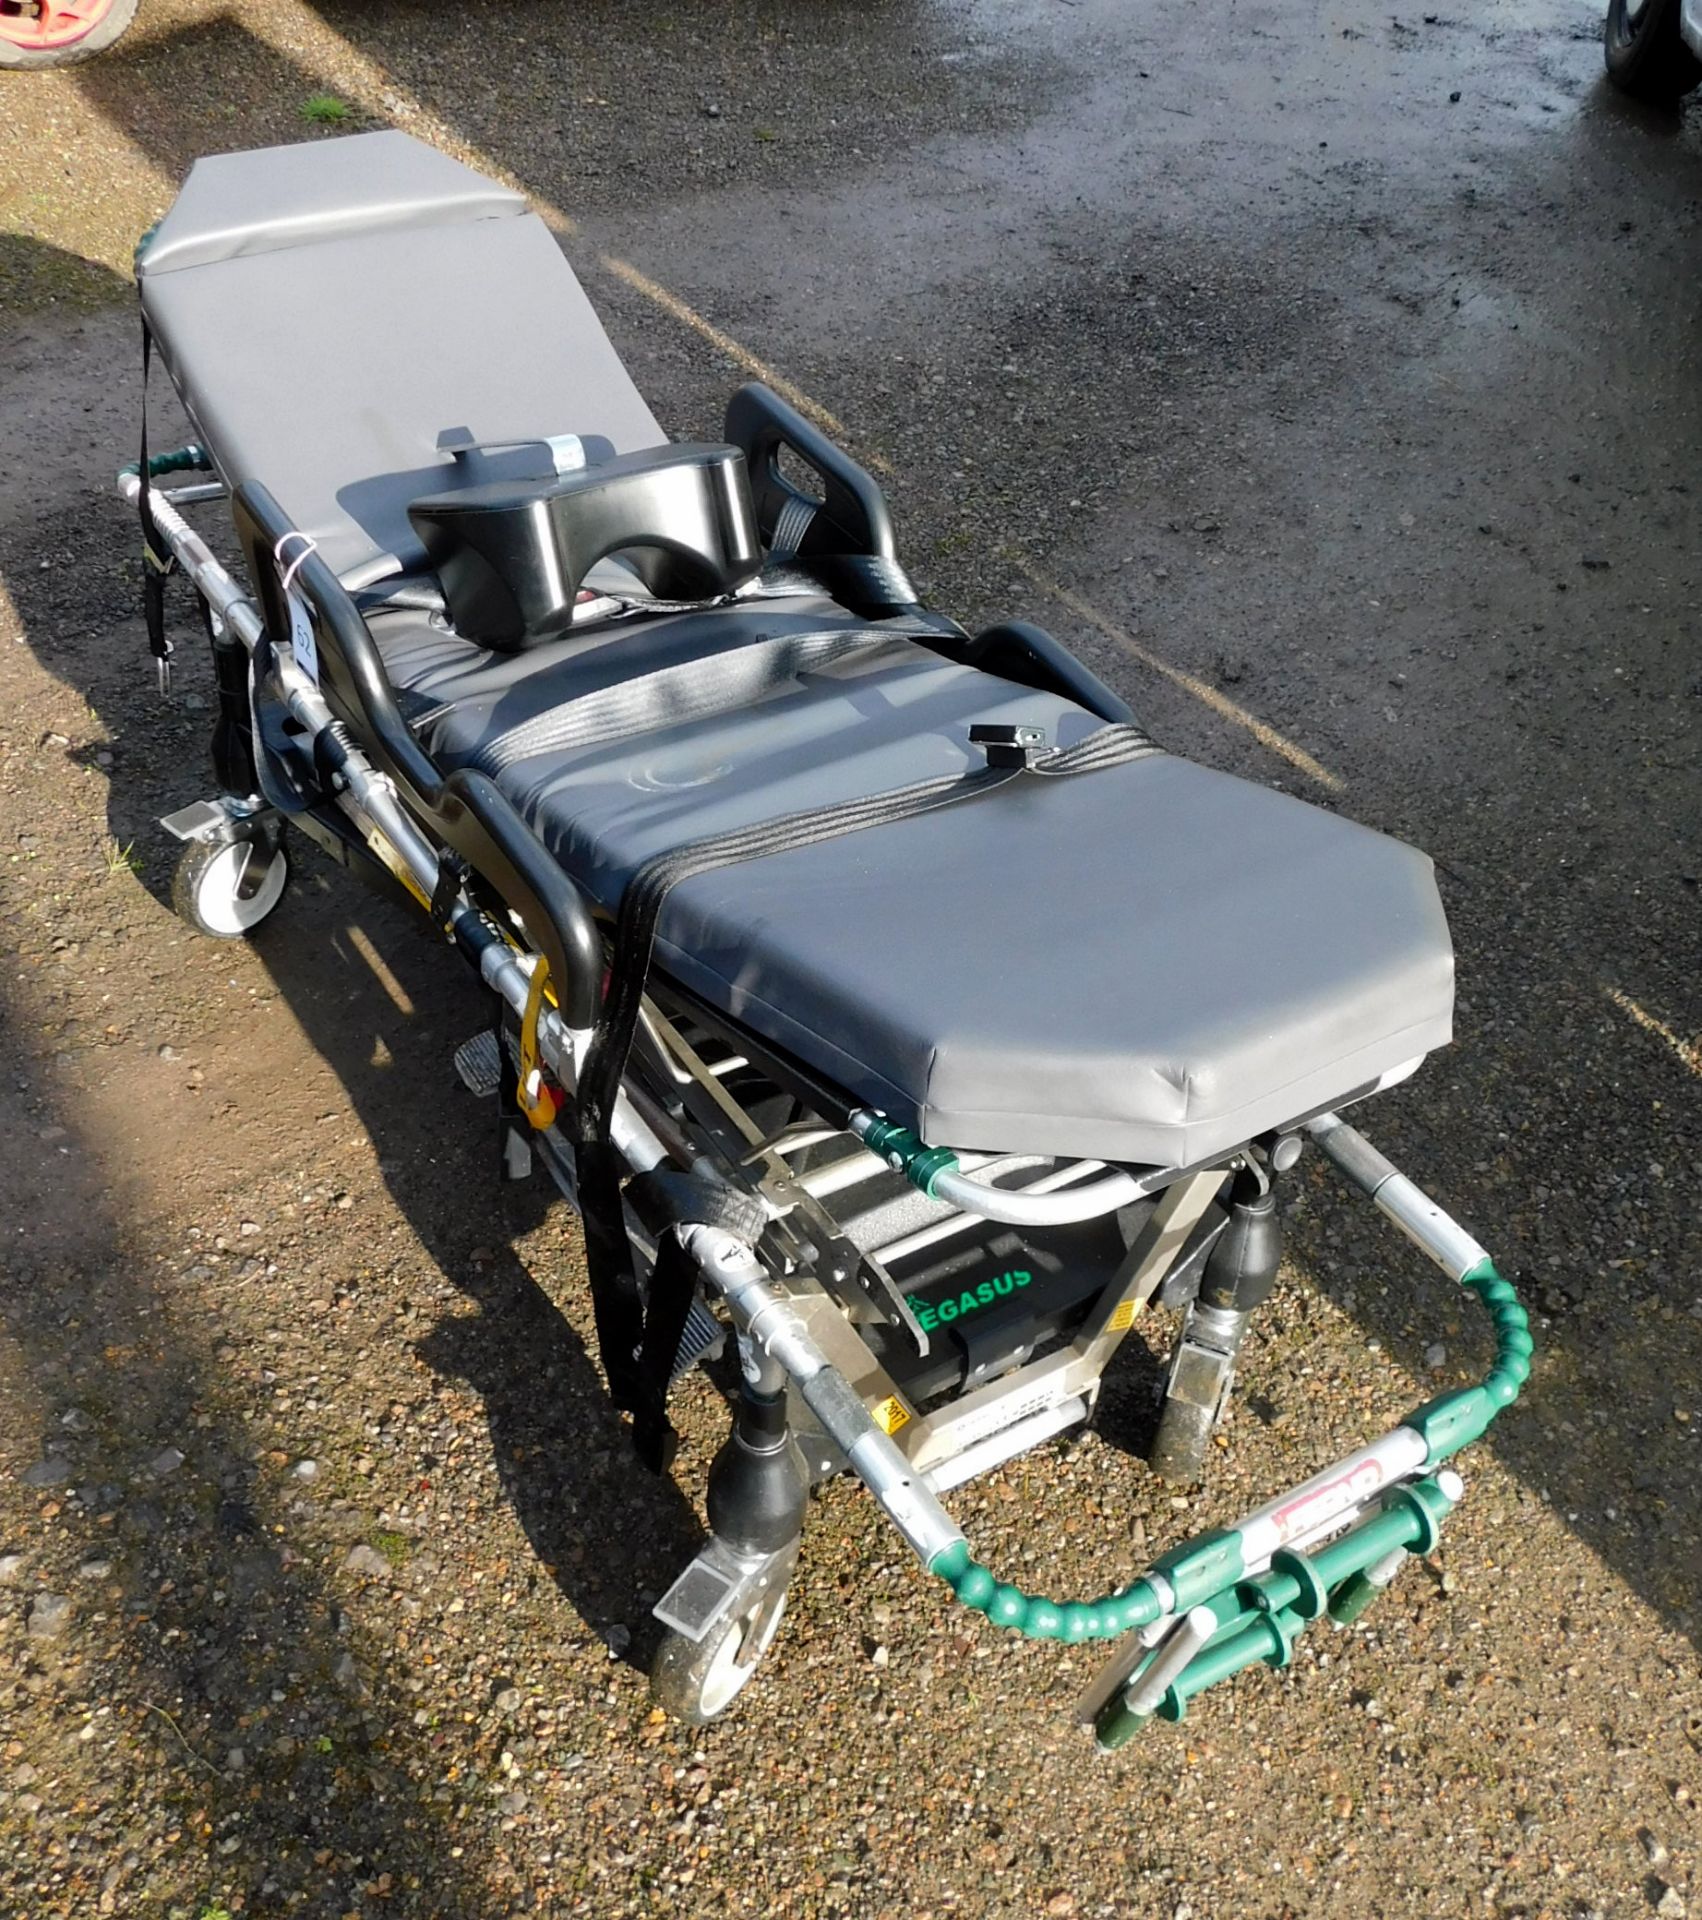 Ferno Pegasus Stretcher s/n PEG2229 (2007), Lift Count 22762 (Stored on Lot 30) (Located South - Image 4 of 5